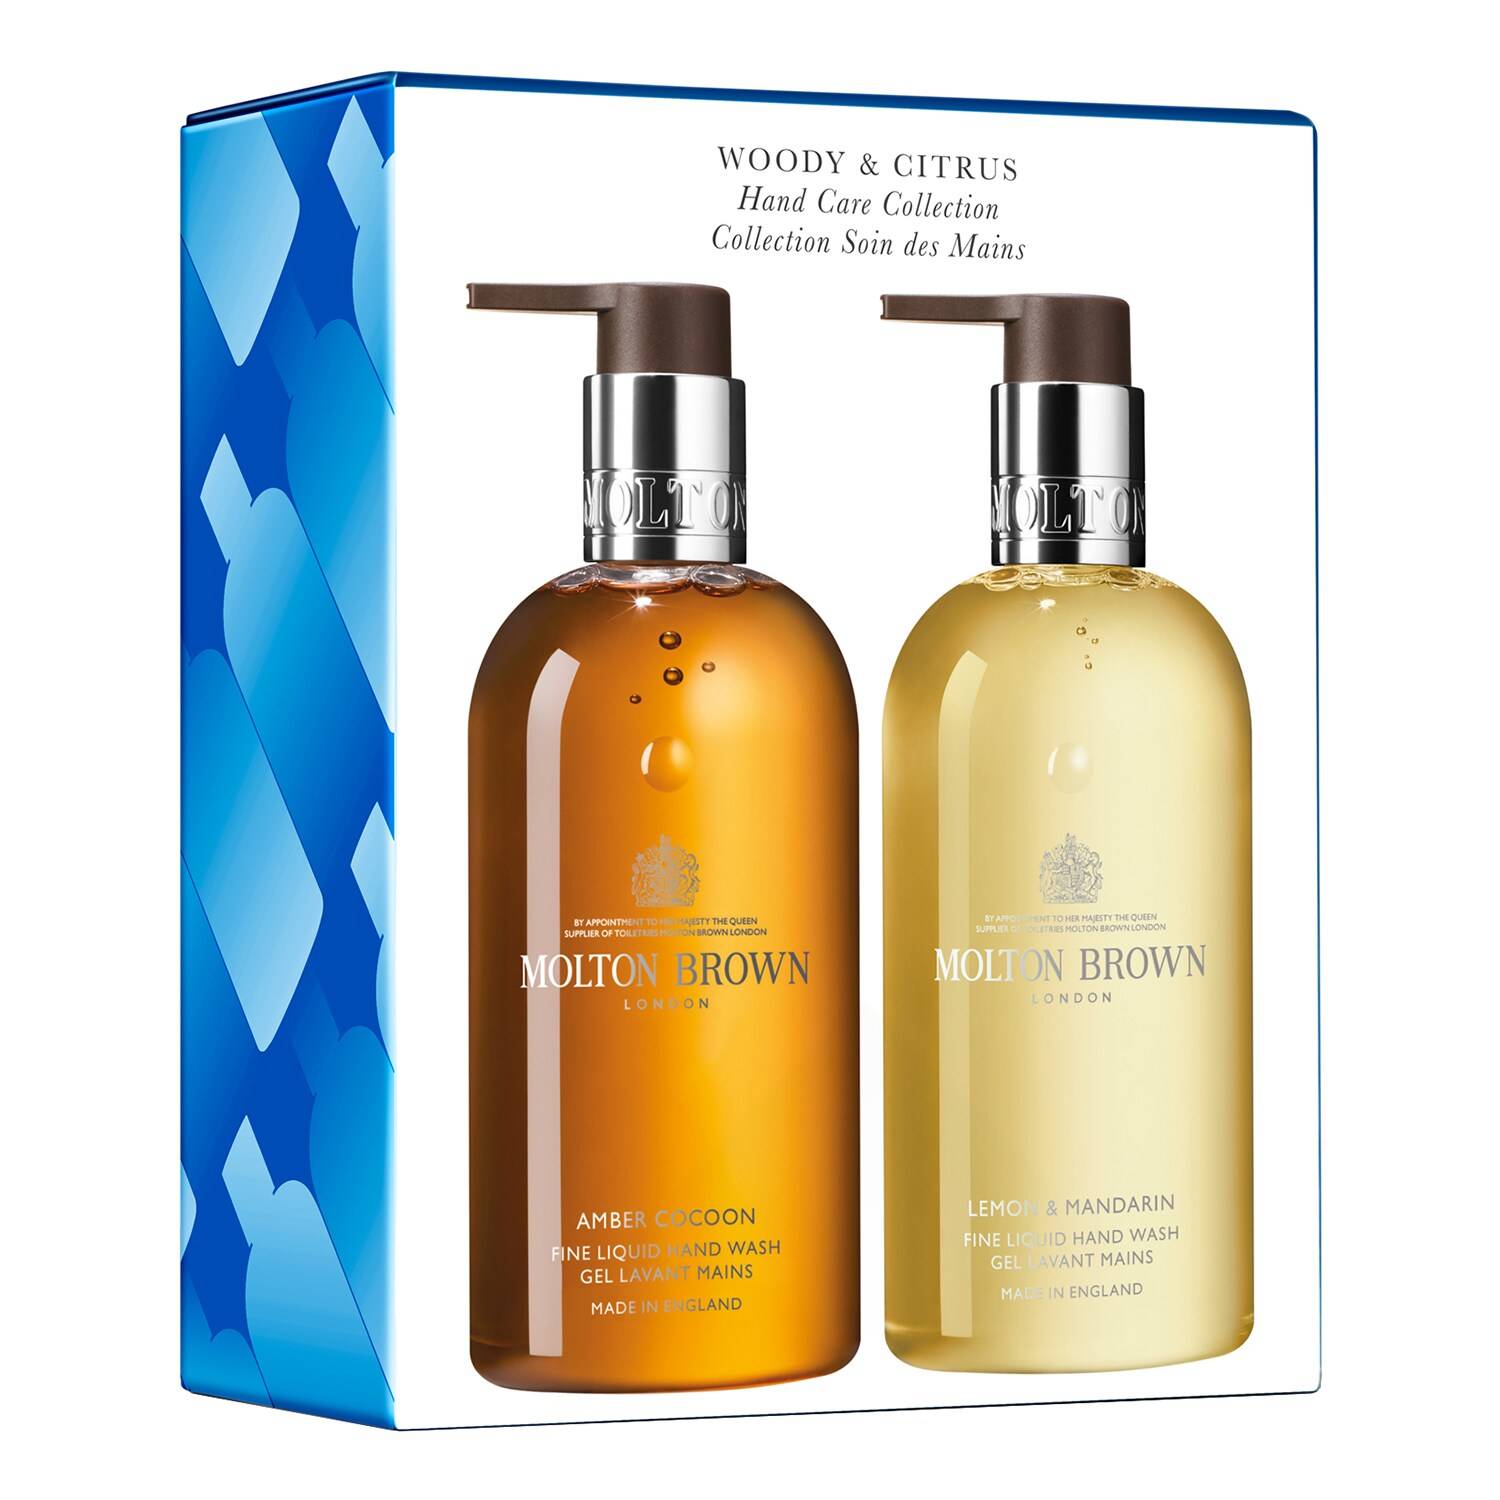 Molton Brown Woody & Citrus Hand Care Gift Set